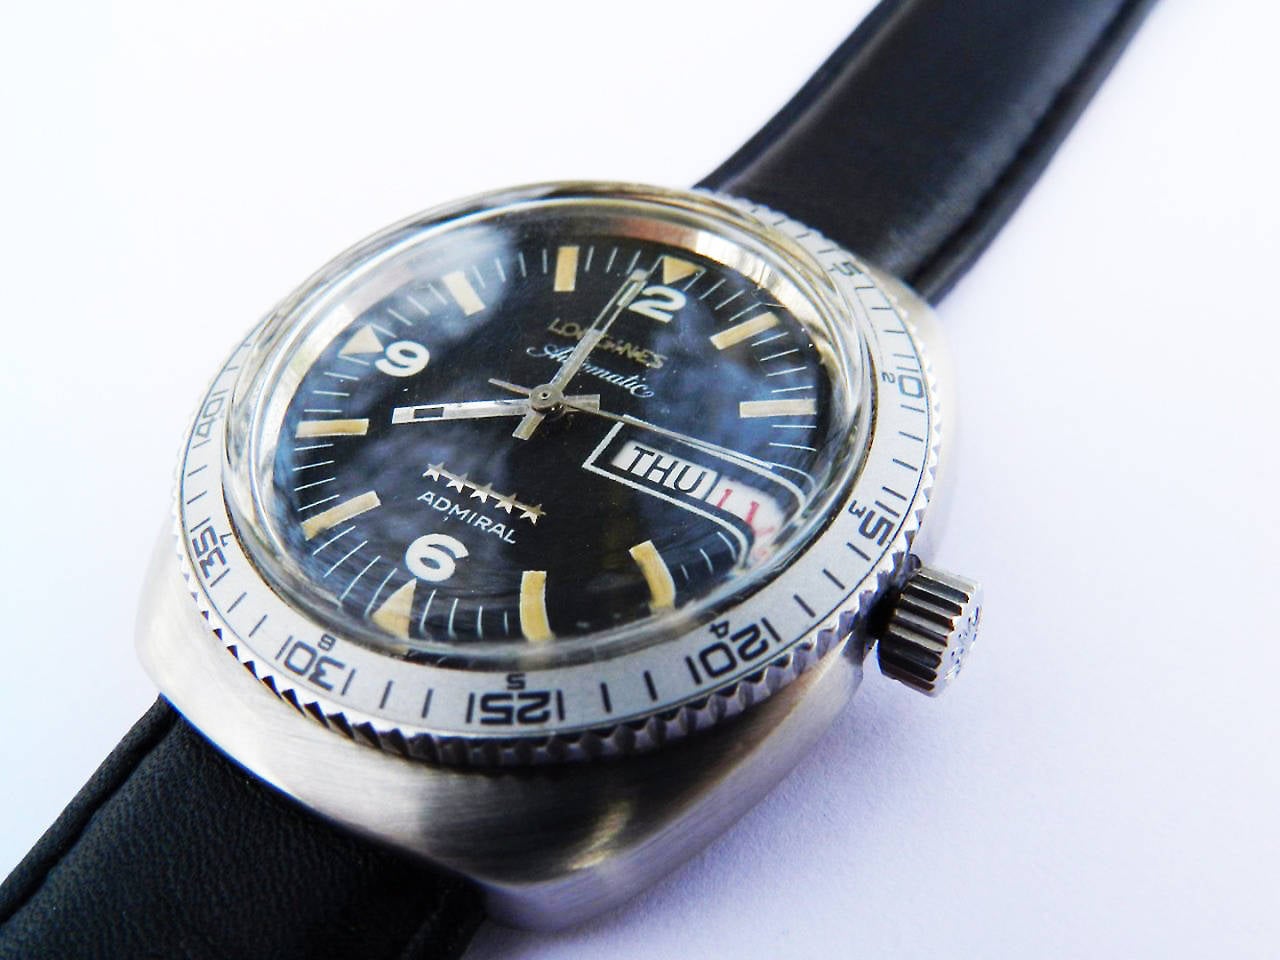 Longines Admiral 5 Star Automatic Mens Divers from about 1950-60's.
The dial is in very good condition, despite the lume century still shines very nicely and is in place. Lace to set the hour is original logo.
Movement: mechanical-automatic 21